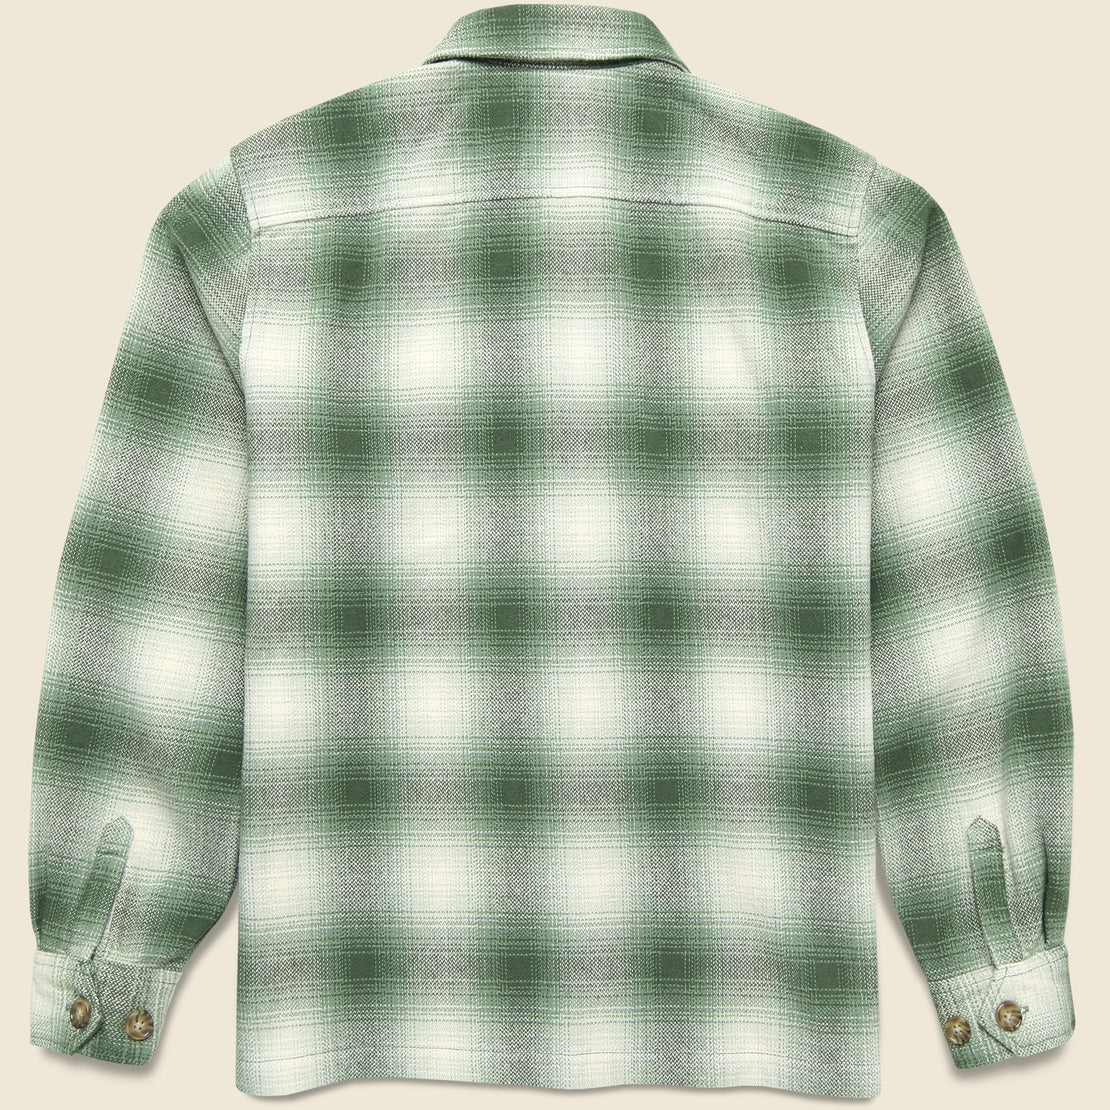 Shiloh Flannel - Pine Shadow Plaid - Katin - STAG Provisions - Tops - L/S Woven - Plaid